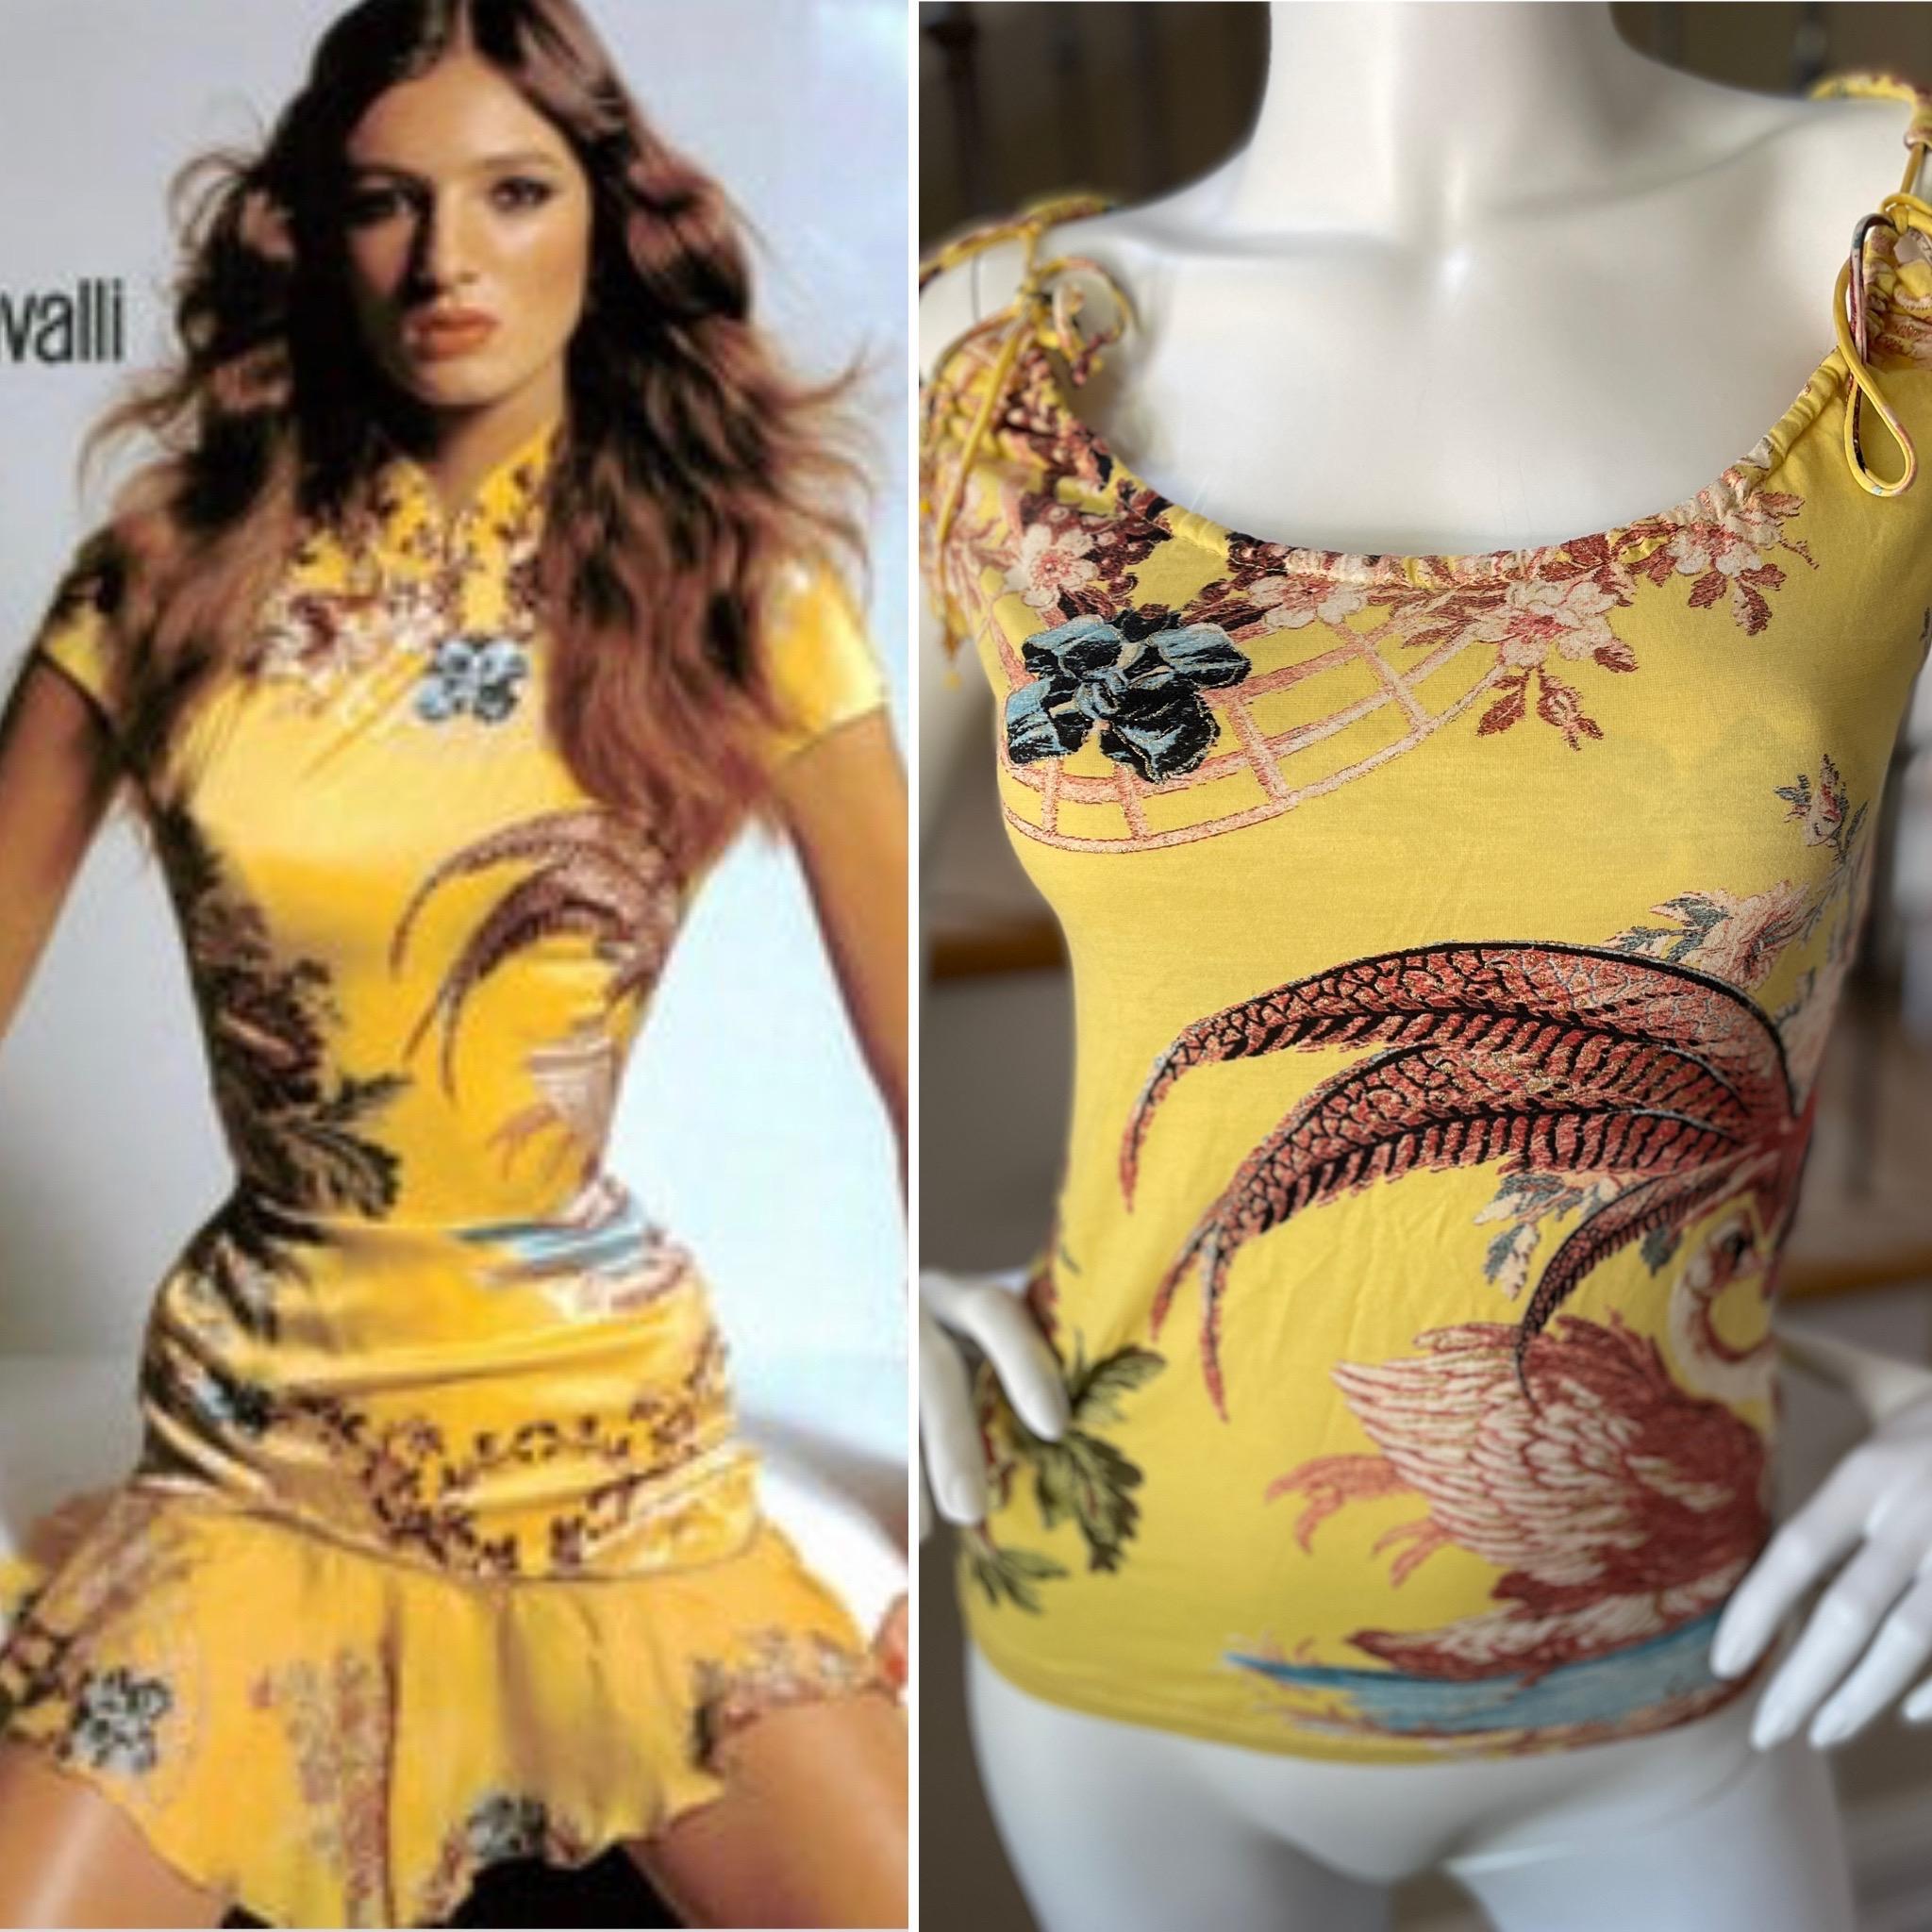 Roberto Cavalli Spring 2003 Pheasant Feather Floral Top 
Size M
Bust 36